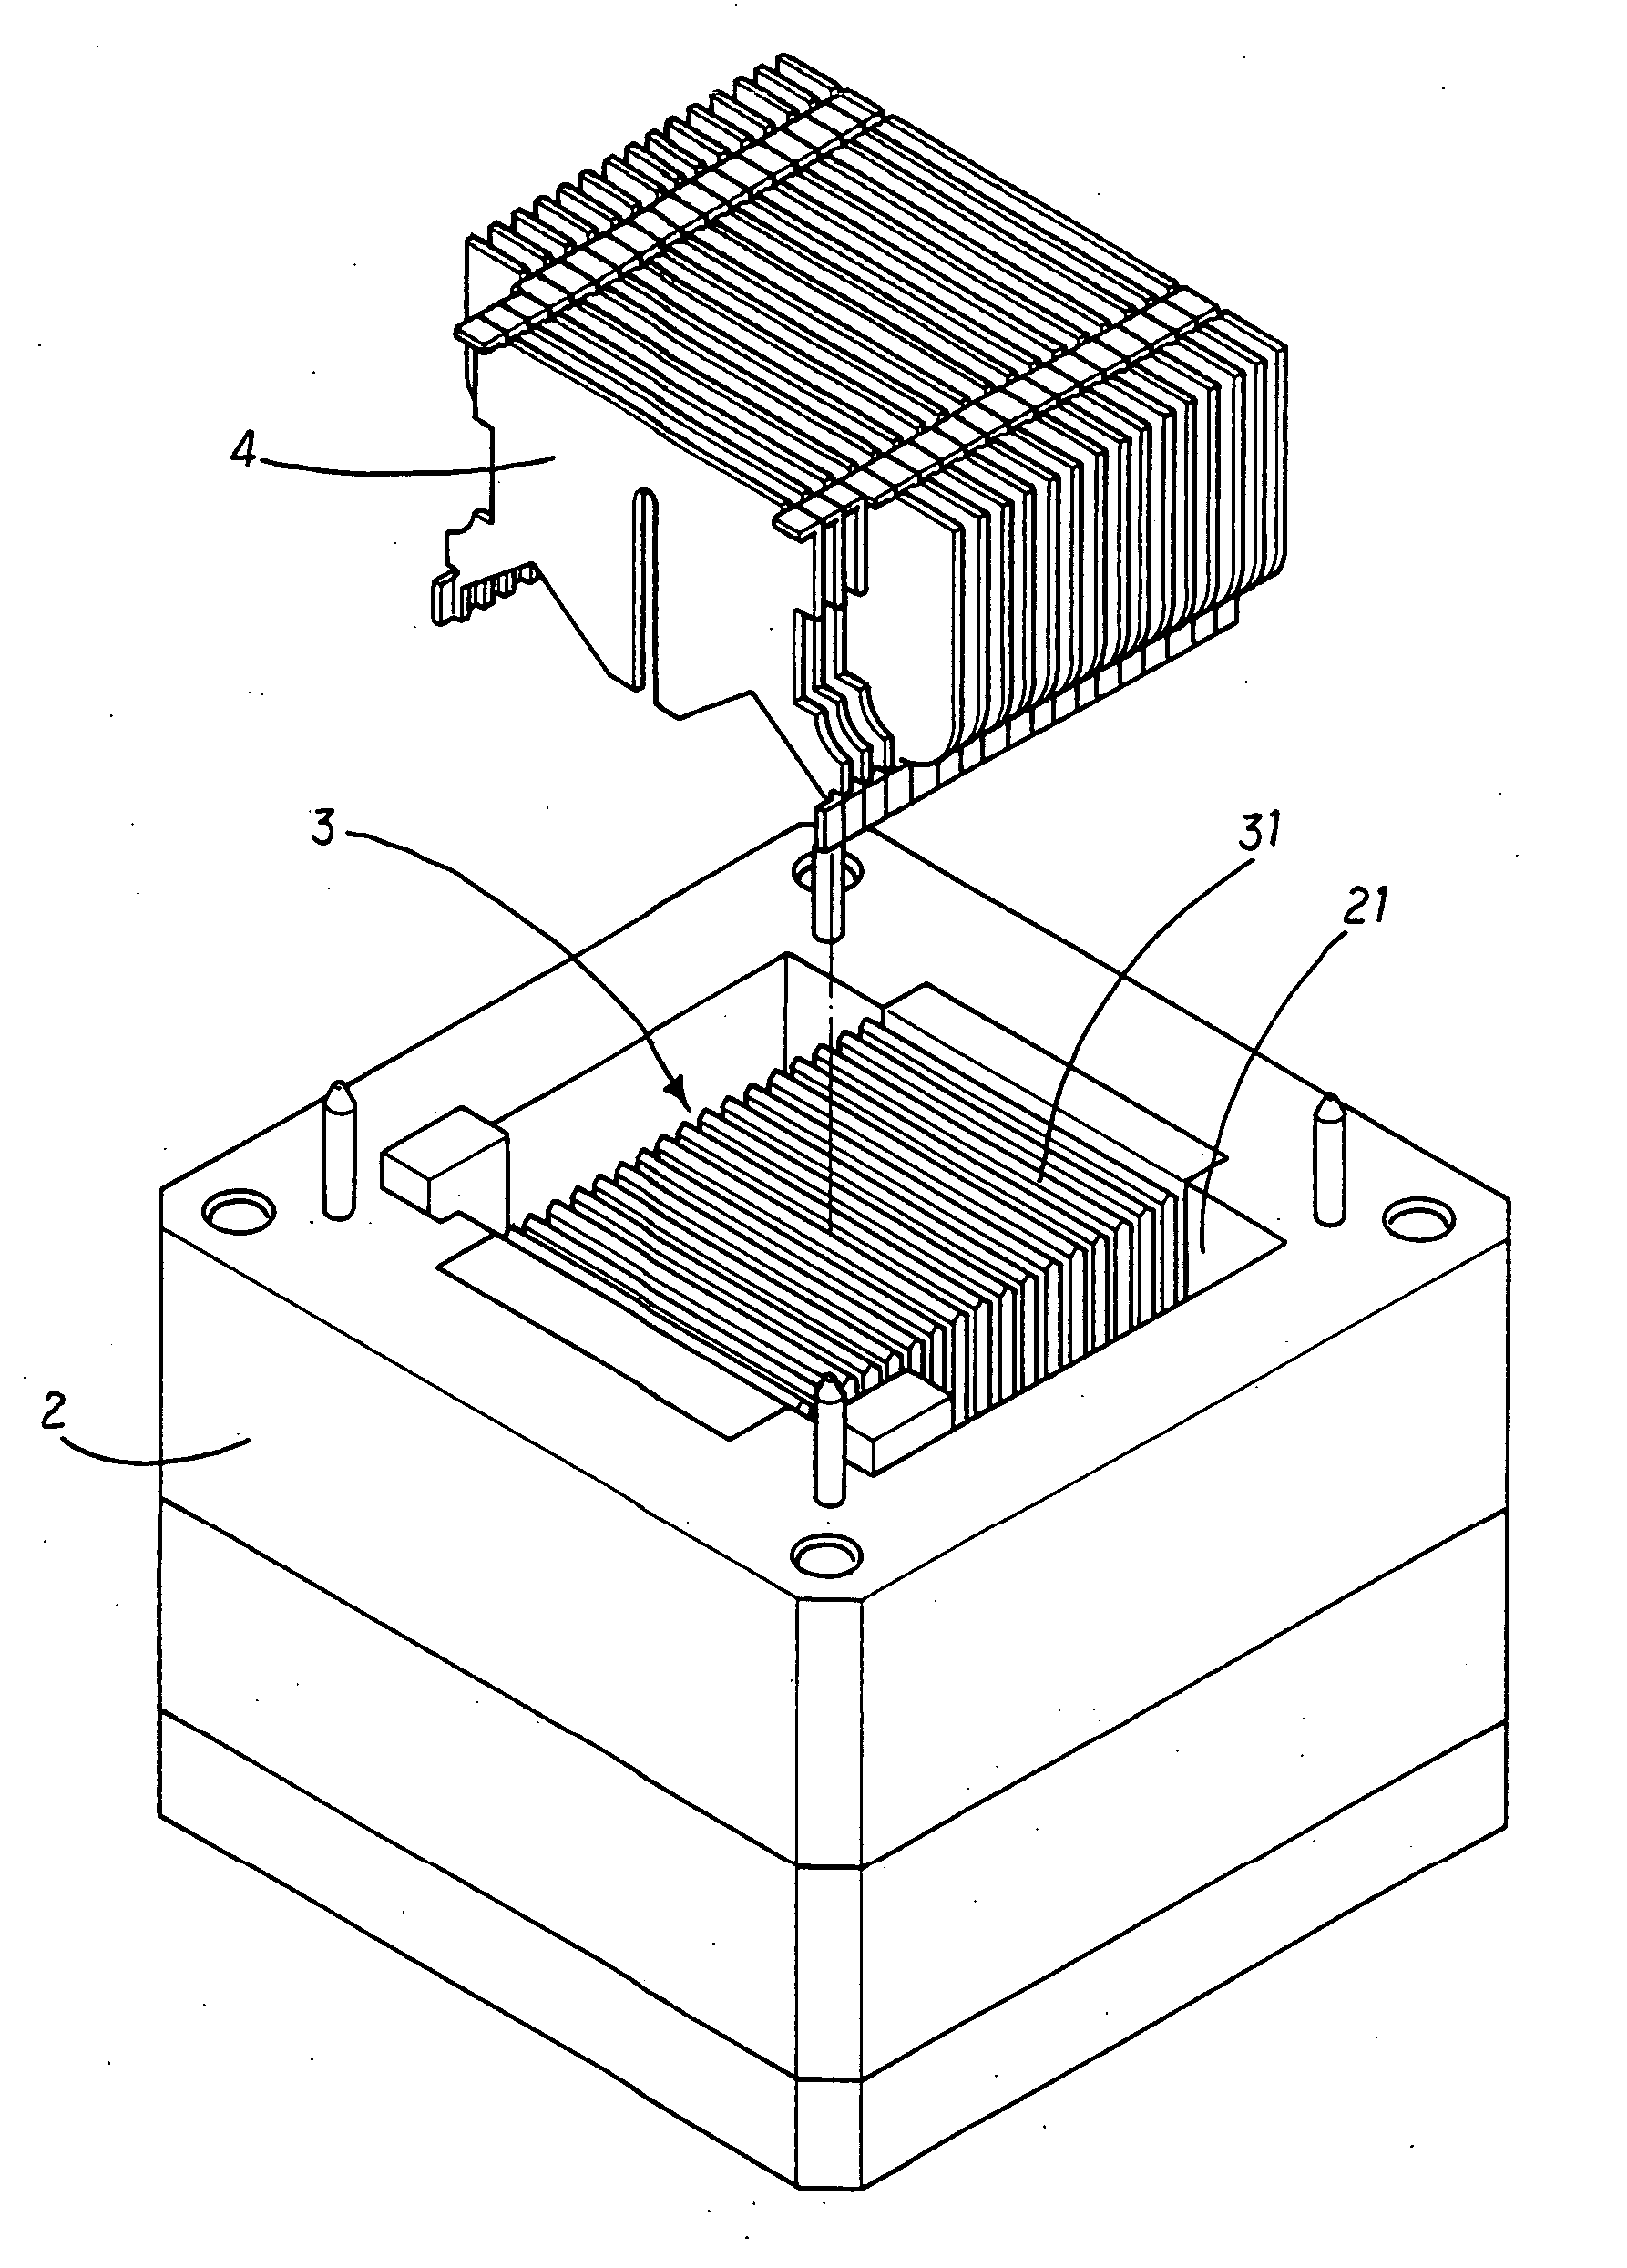 Method for riveting fins into bottom plate of heat dissipating device